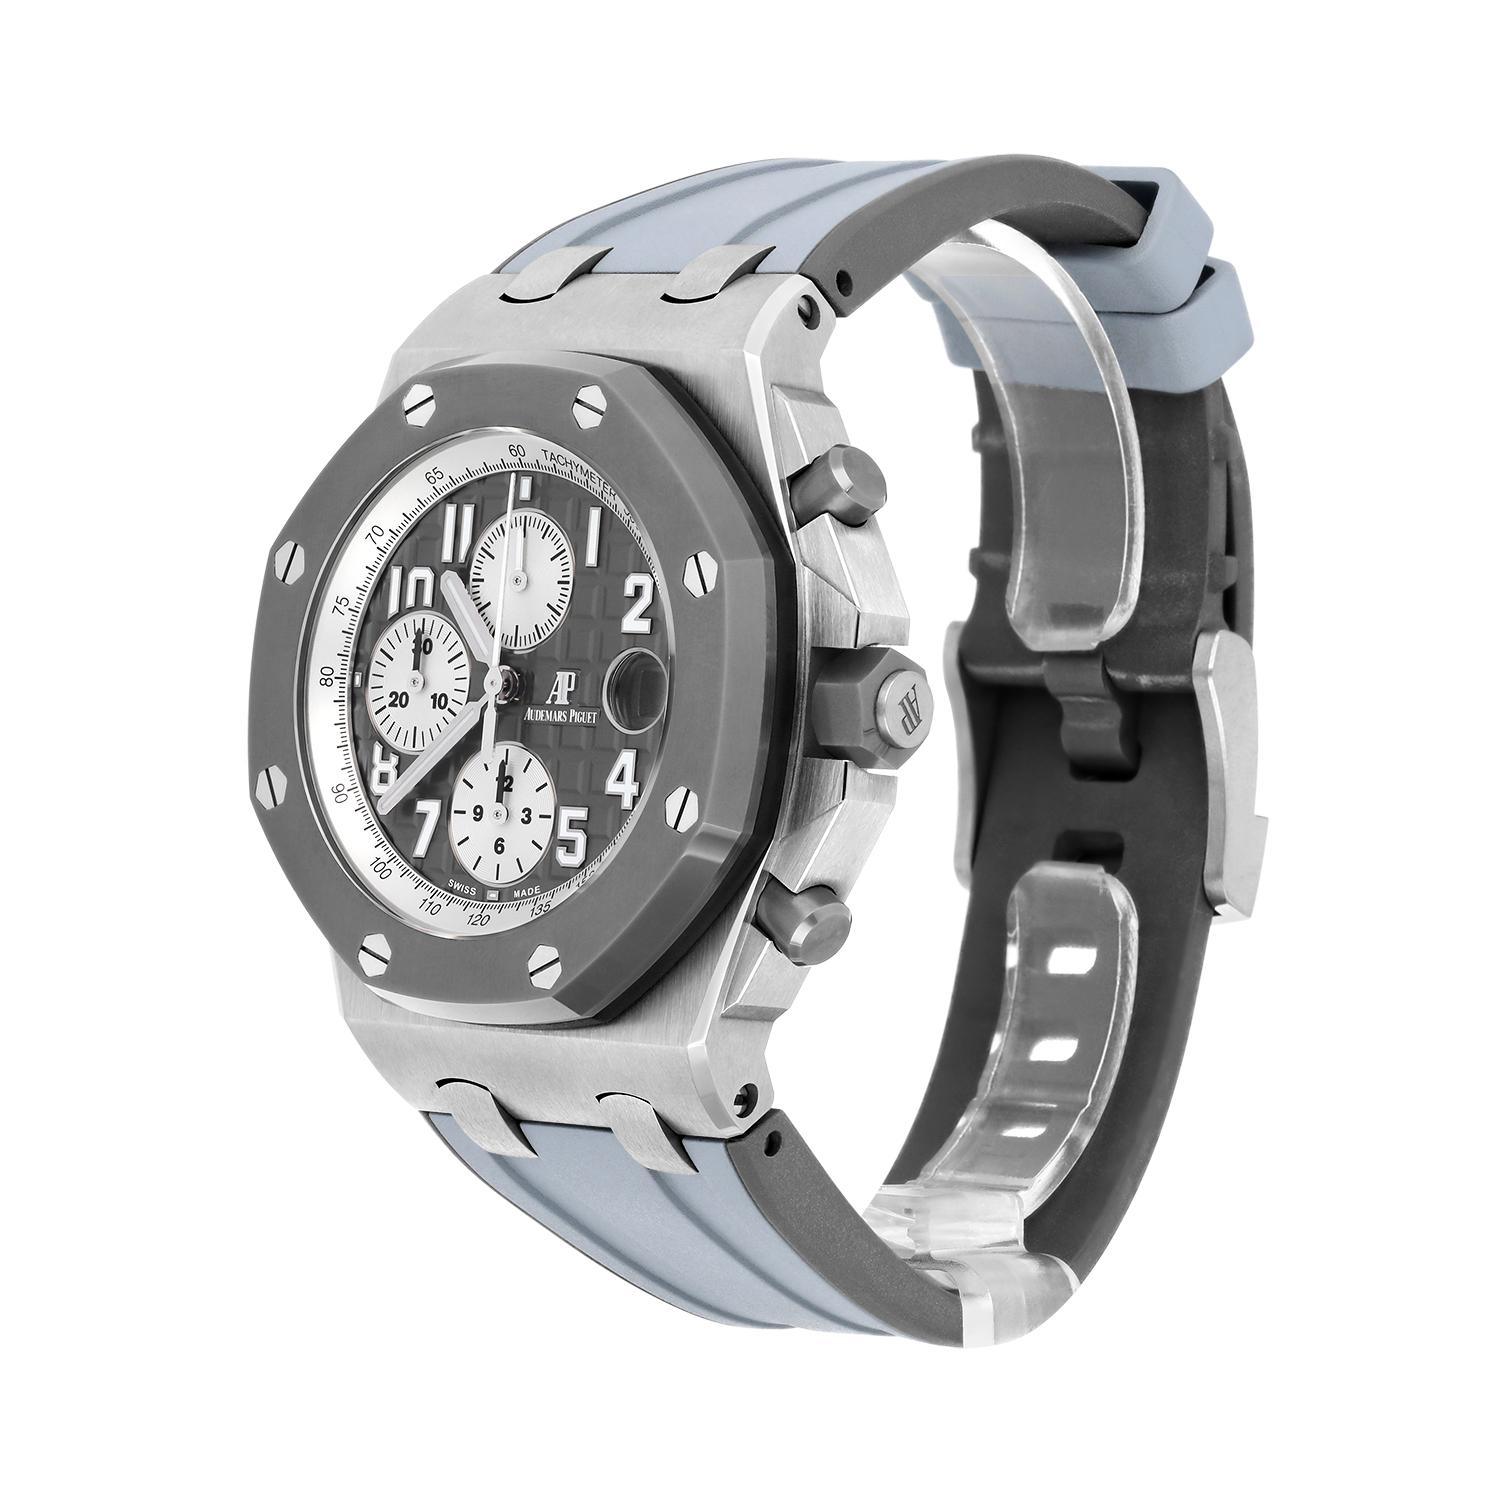 Audemars Piguet Royal Oak Offshore Chrono Ghost 42mm Titanium and Ceramic New In New Condition For Sale In New York, NY